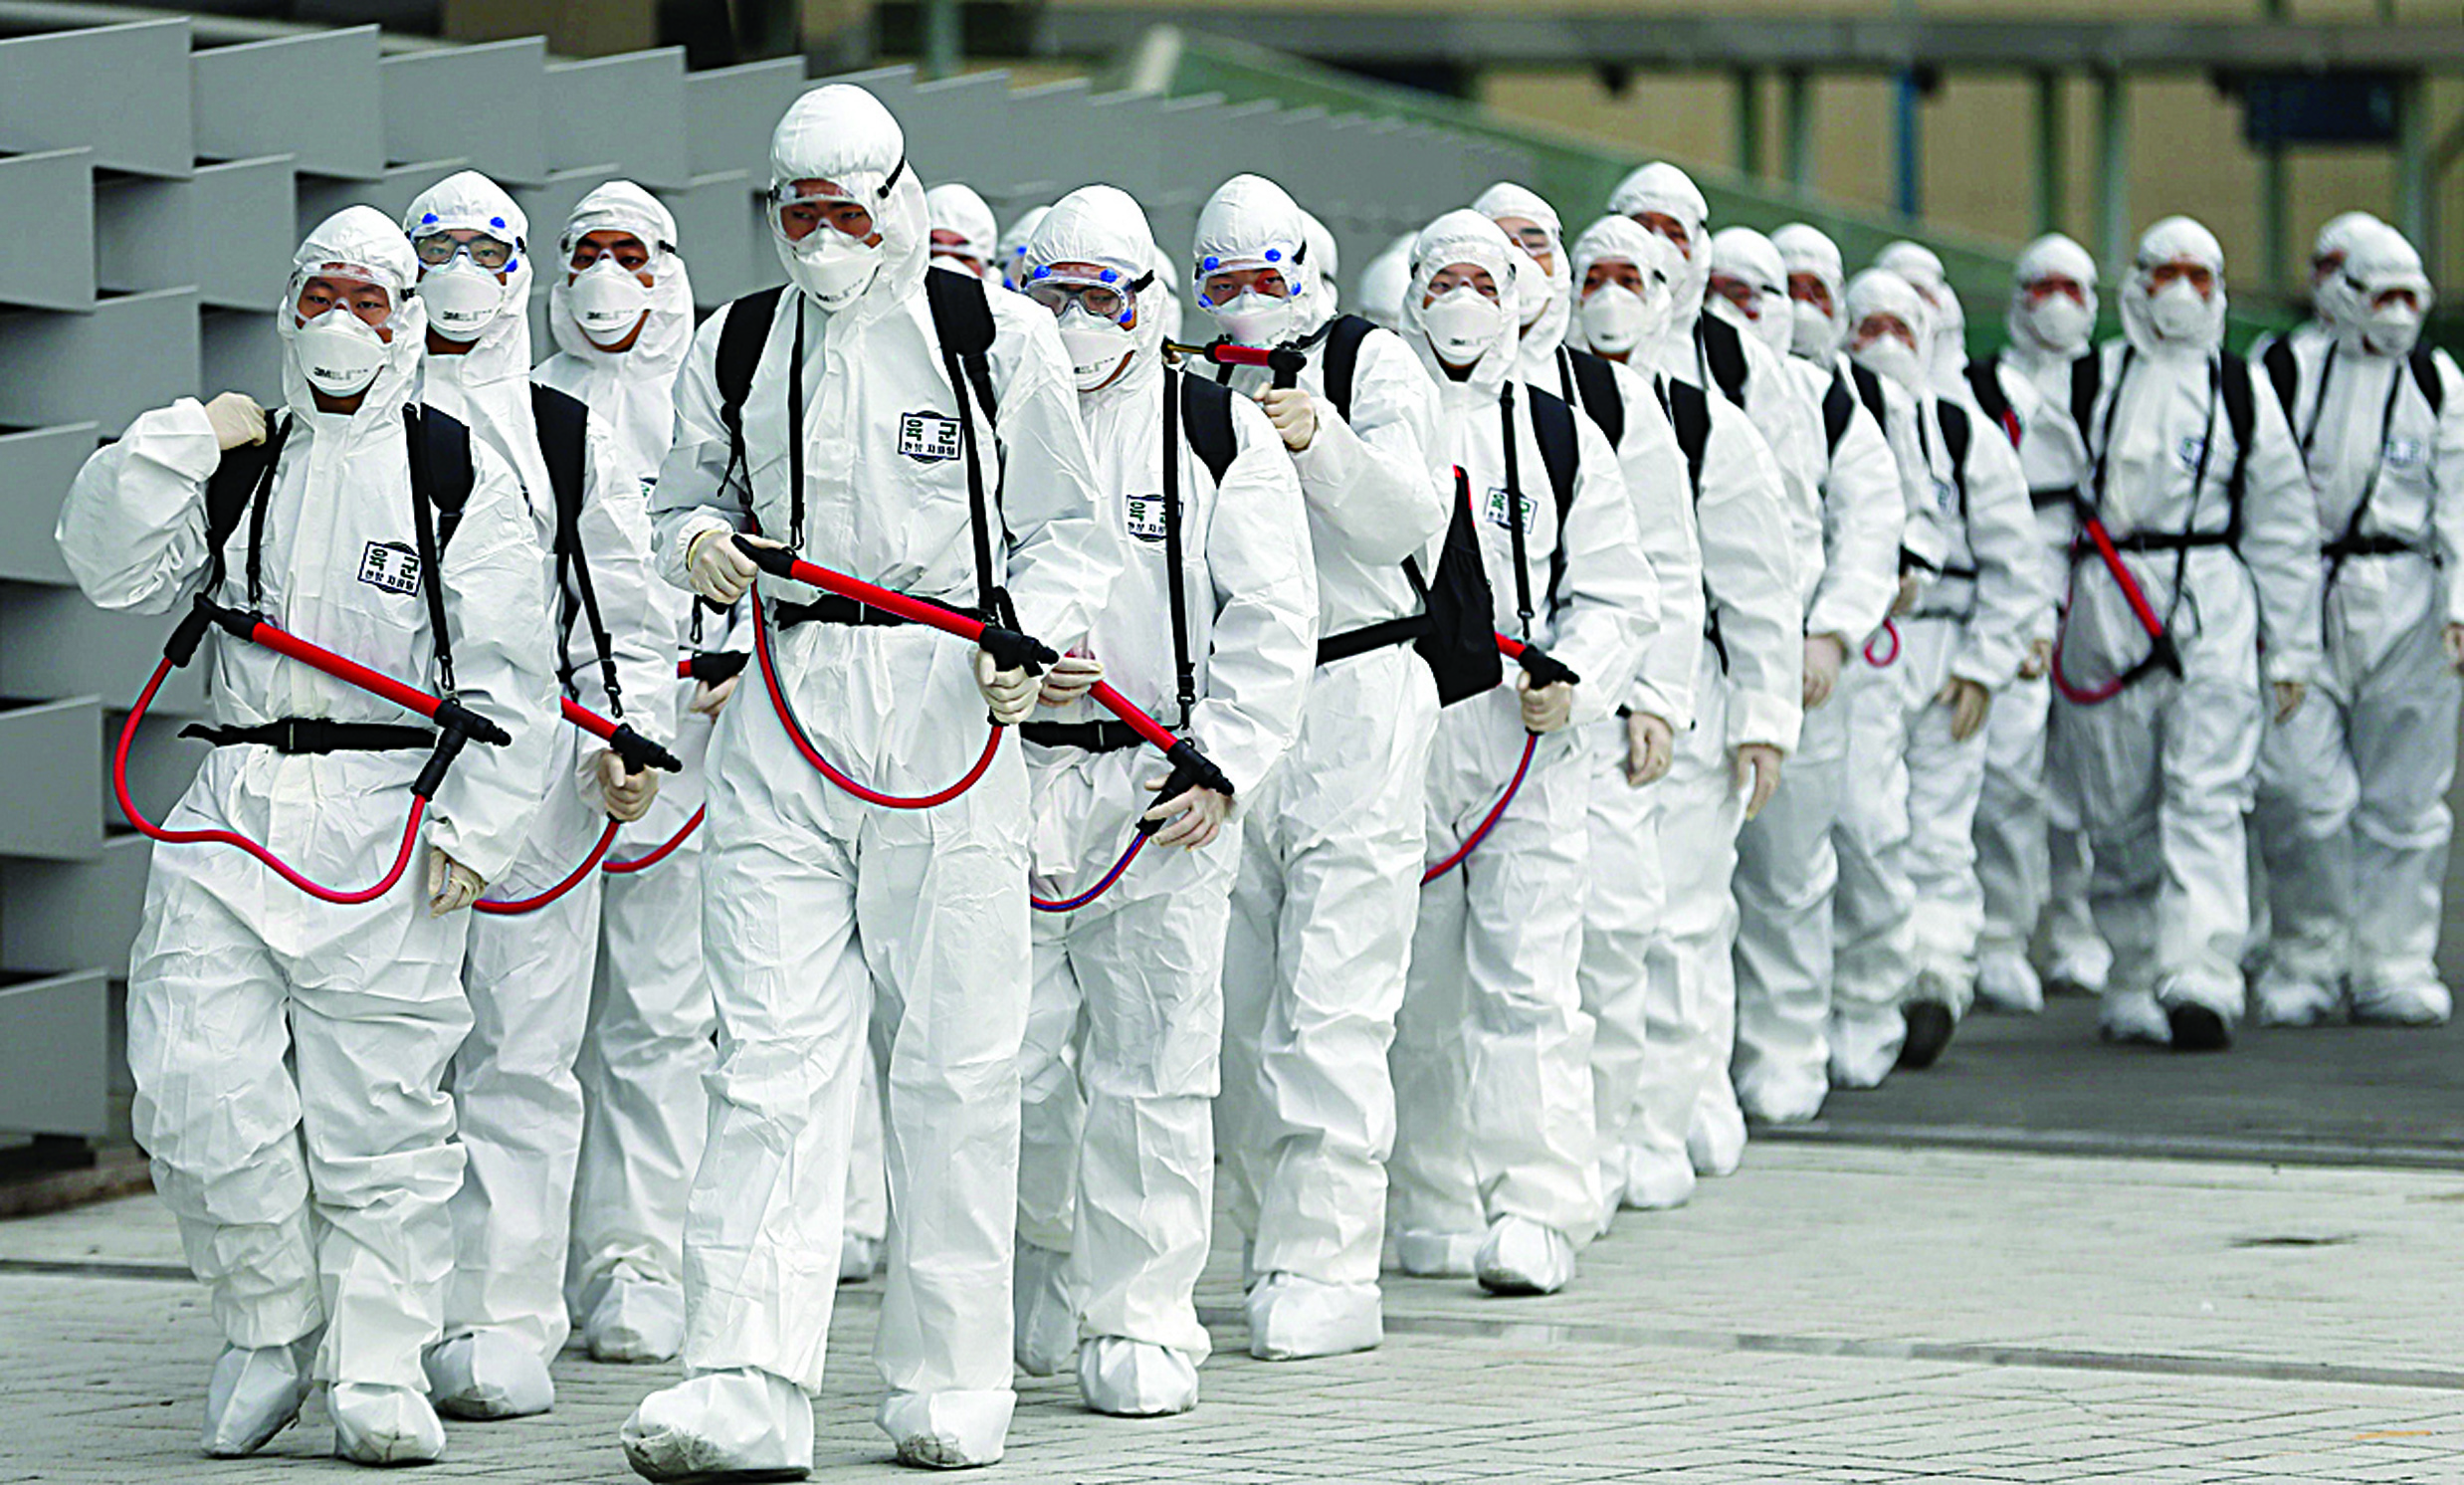 TOPSHOT - South Korean soldiers wearing protective gear move to spray disinfectant as part of preventive measures against the spread of the COVID-19 coronavirus, at Dongdaegu railway station in Daegu on February 29, 2020. - South Korea confirmed 594 more coronavirus cases on February 29, the biggest increase to date for the country and taking the national total to 2,931 infections with three additional deaths. (Photo by - / YONHAP / AFP) / - South Korea OUT / REPUBLIC OF KOREA OUT  NO ARCHIVES  RESTRICTED TO SUBSCRIPTION USE